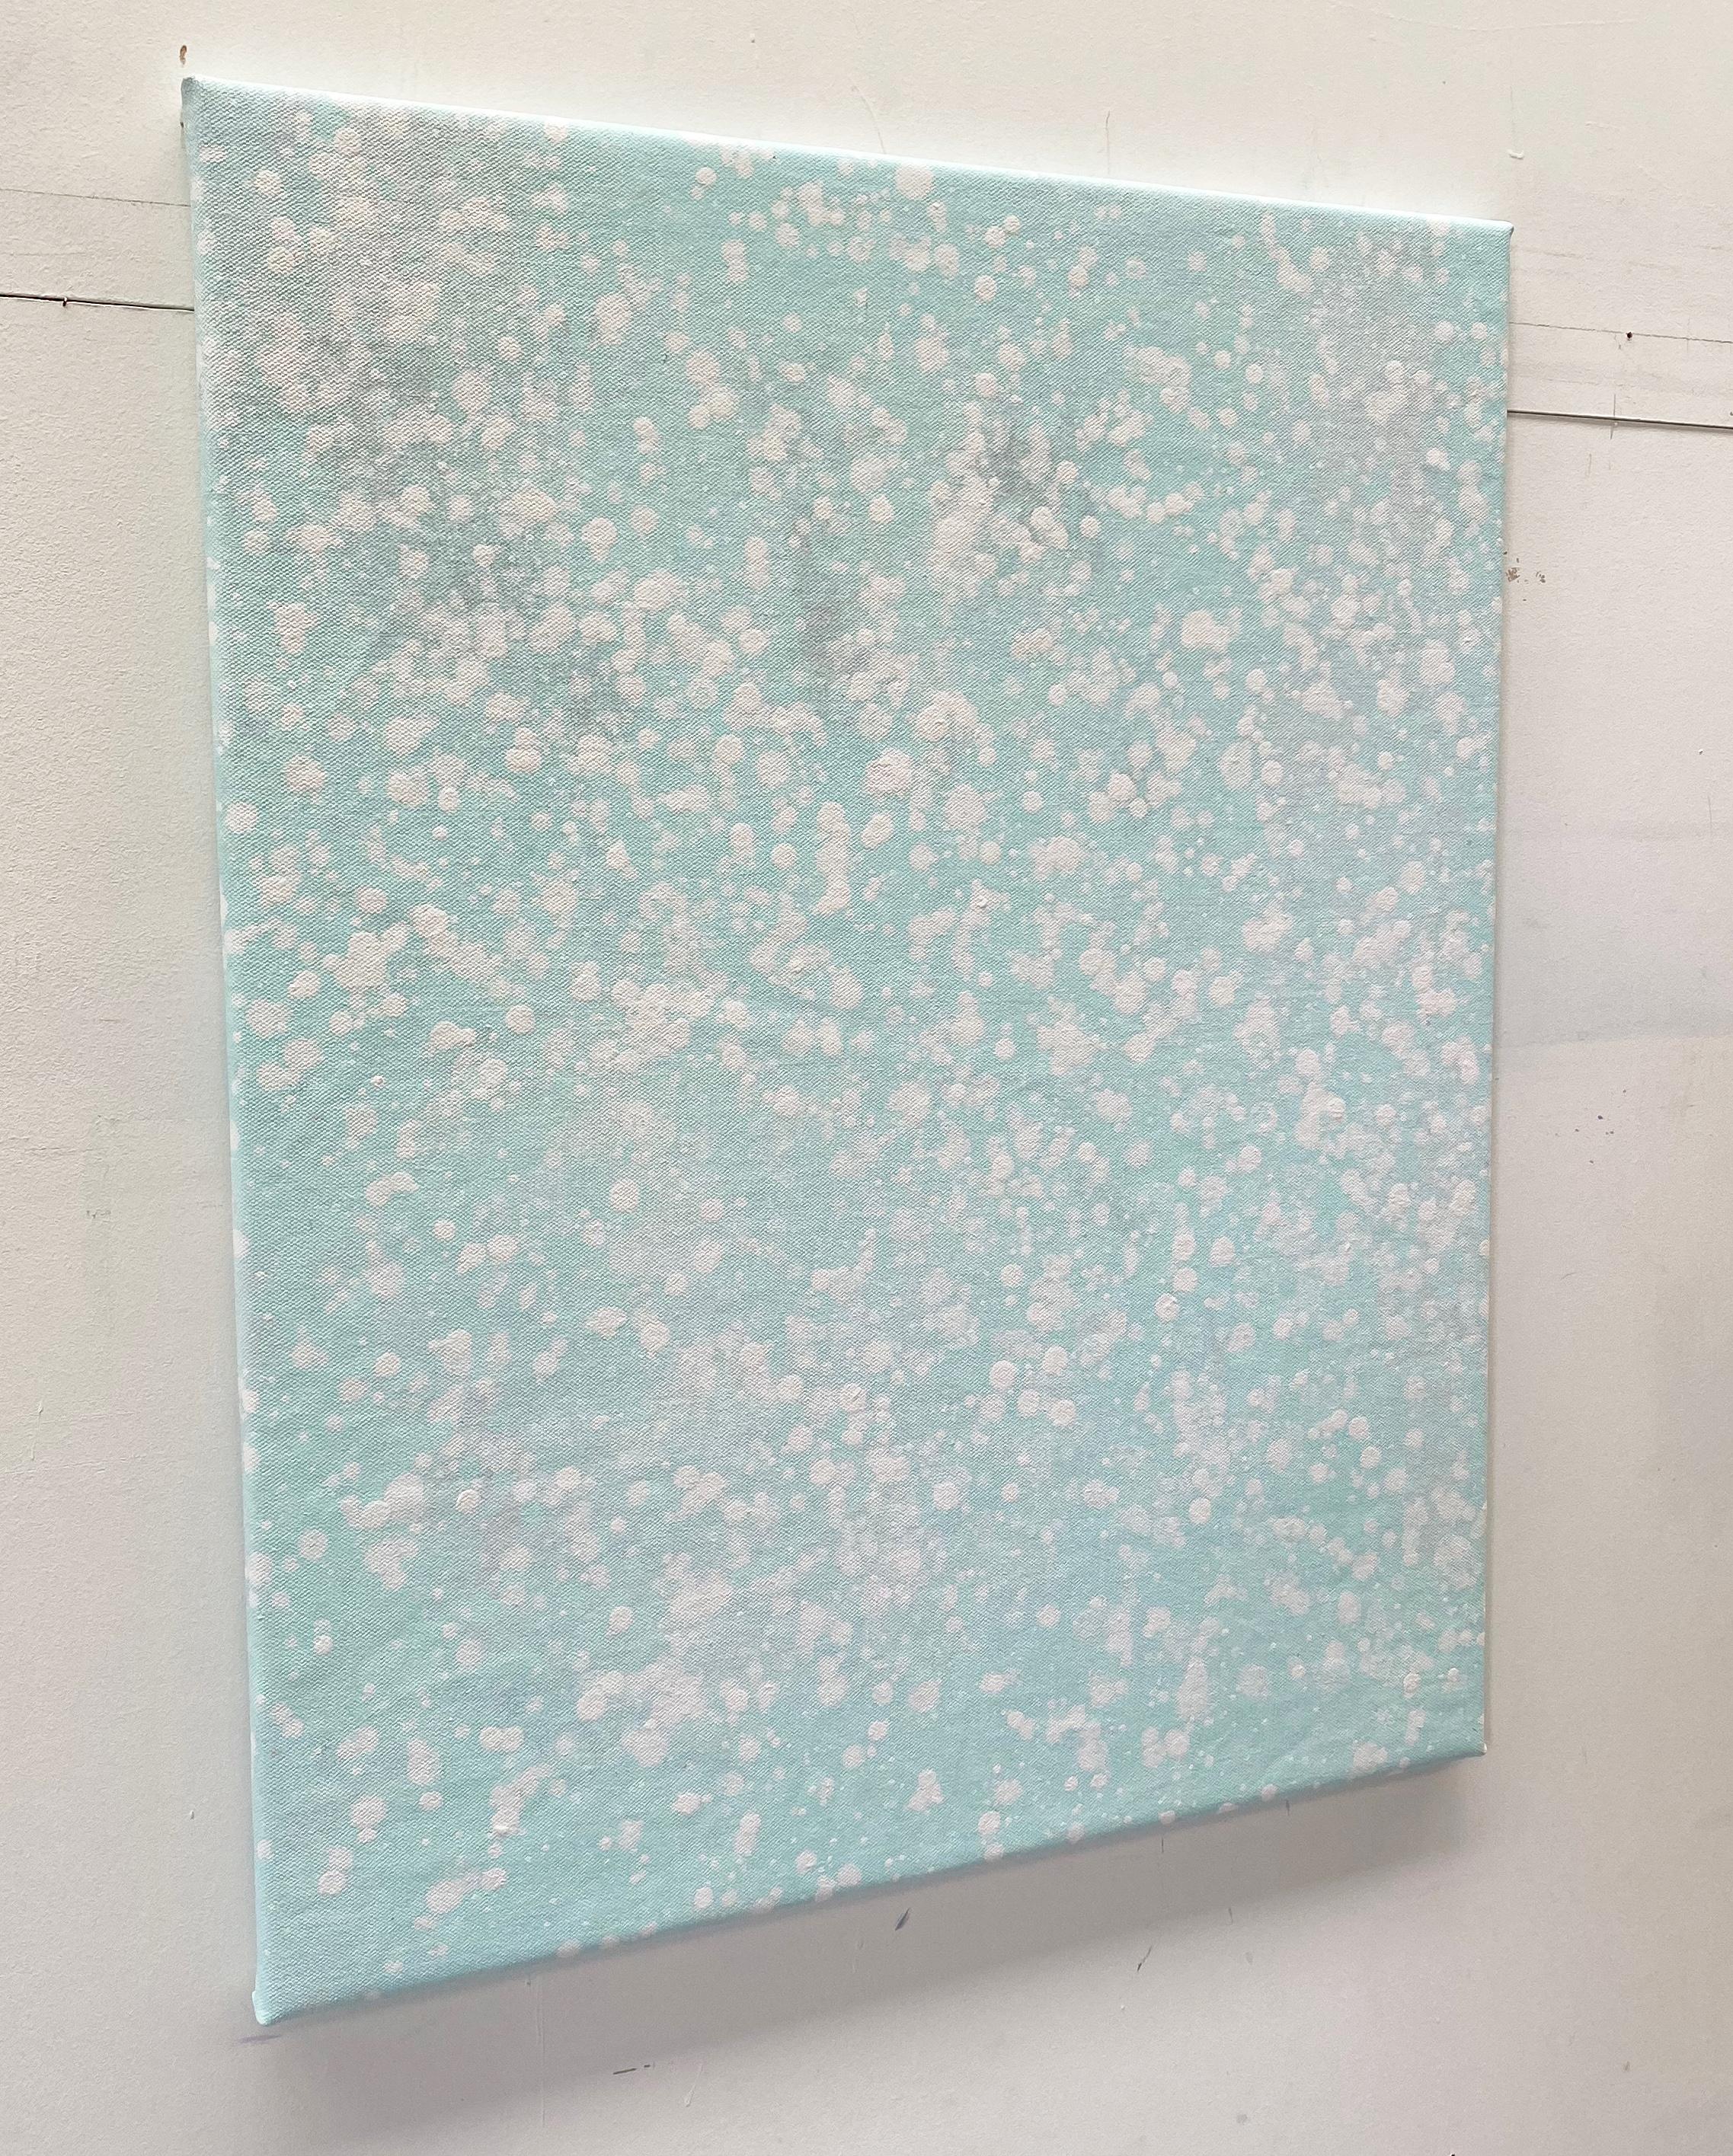 Its snowing pastel mint green dot abstract expressionist painting on linen For Sale 1